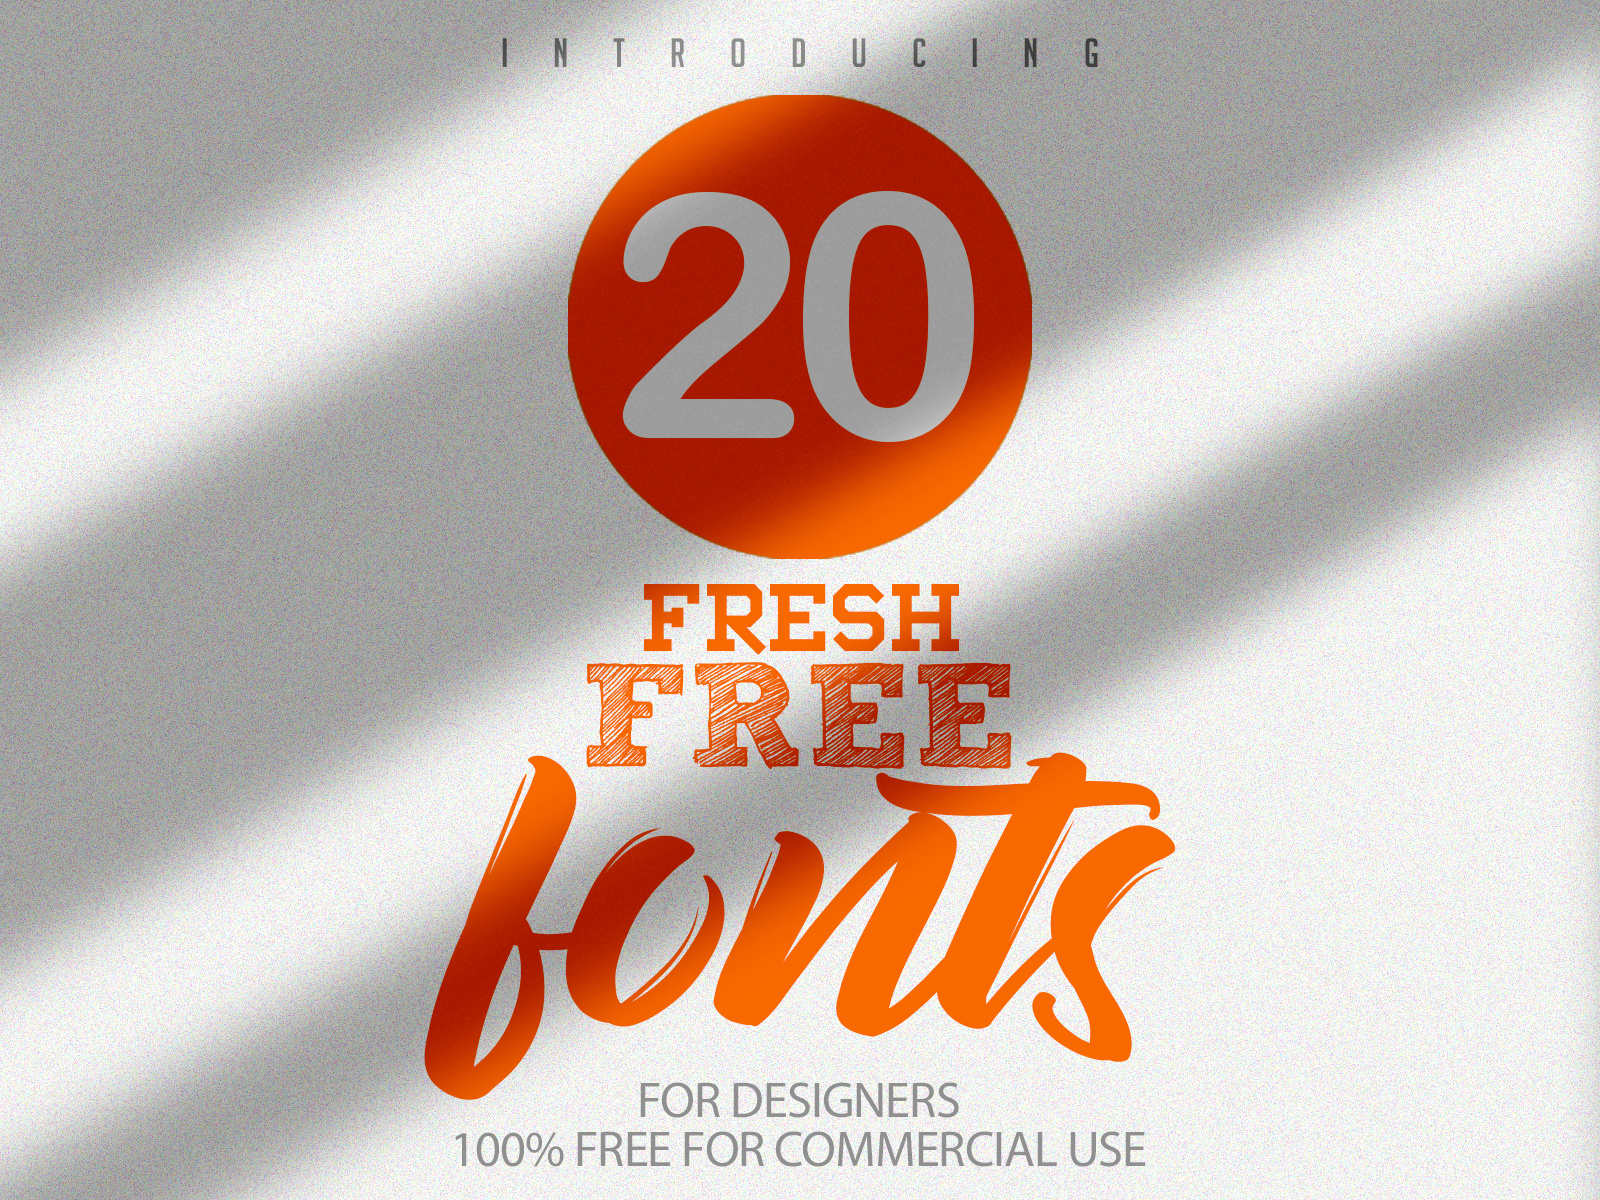 Free Fonts (20 Super Fresh Fonts) by Graphic Design Junction on Dribbble